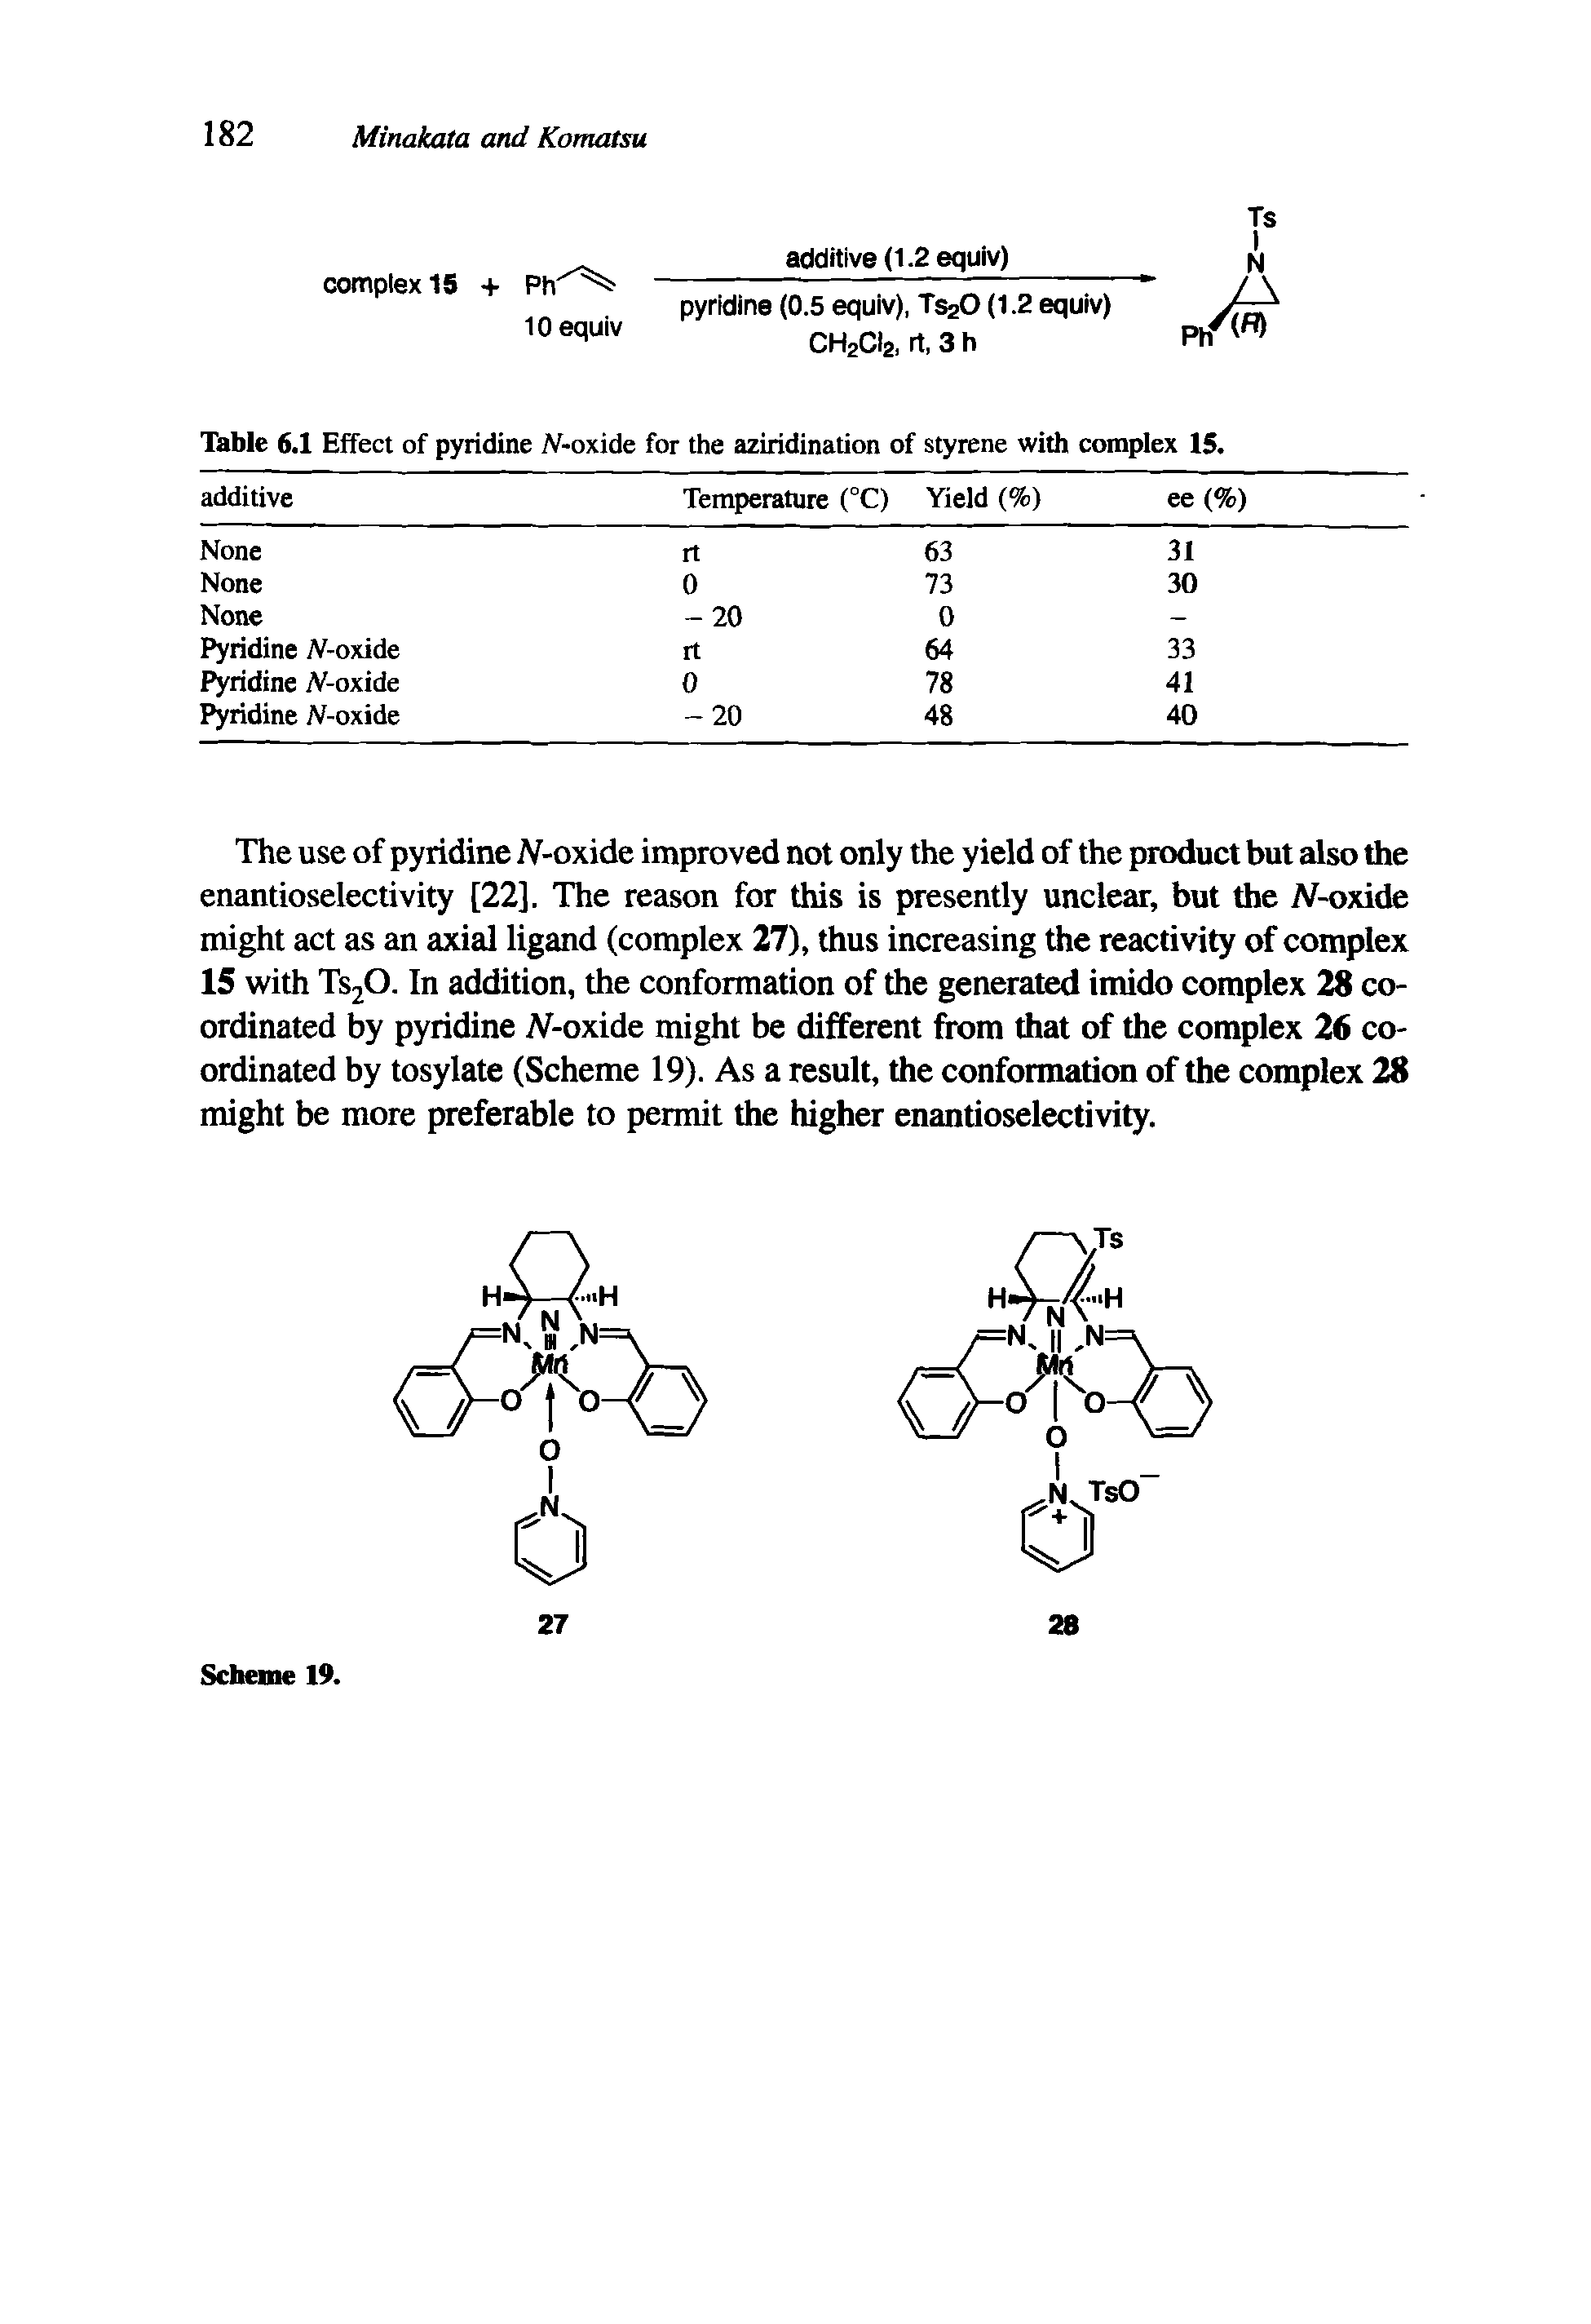 Table 6.1 Effect of pyridine N-oxide for the aziridination of styrene with complex 15.